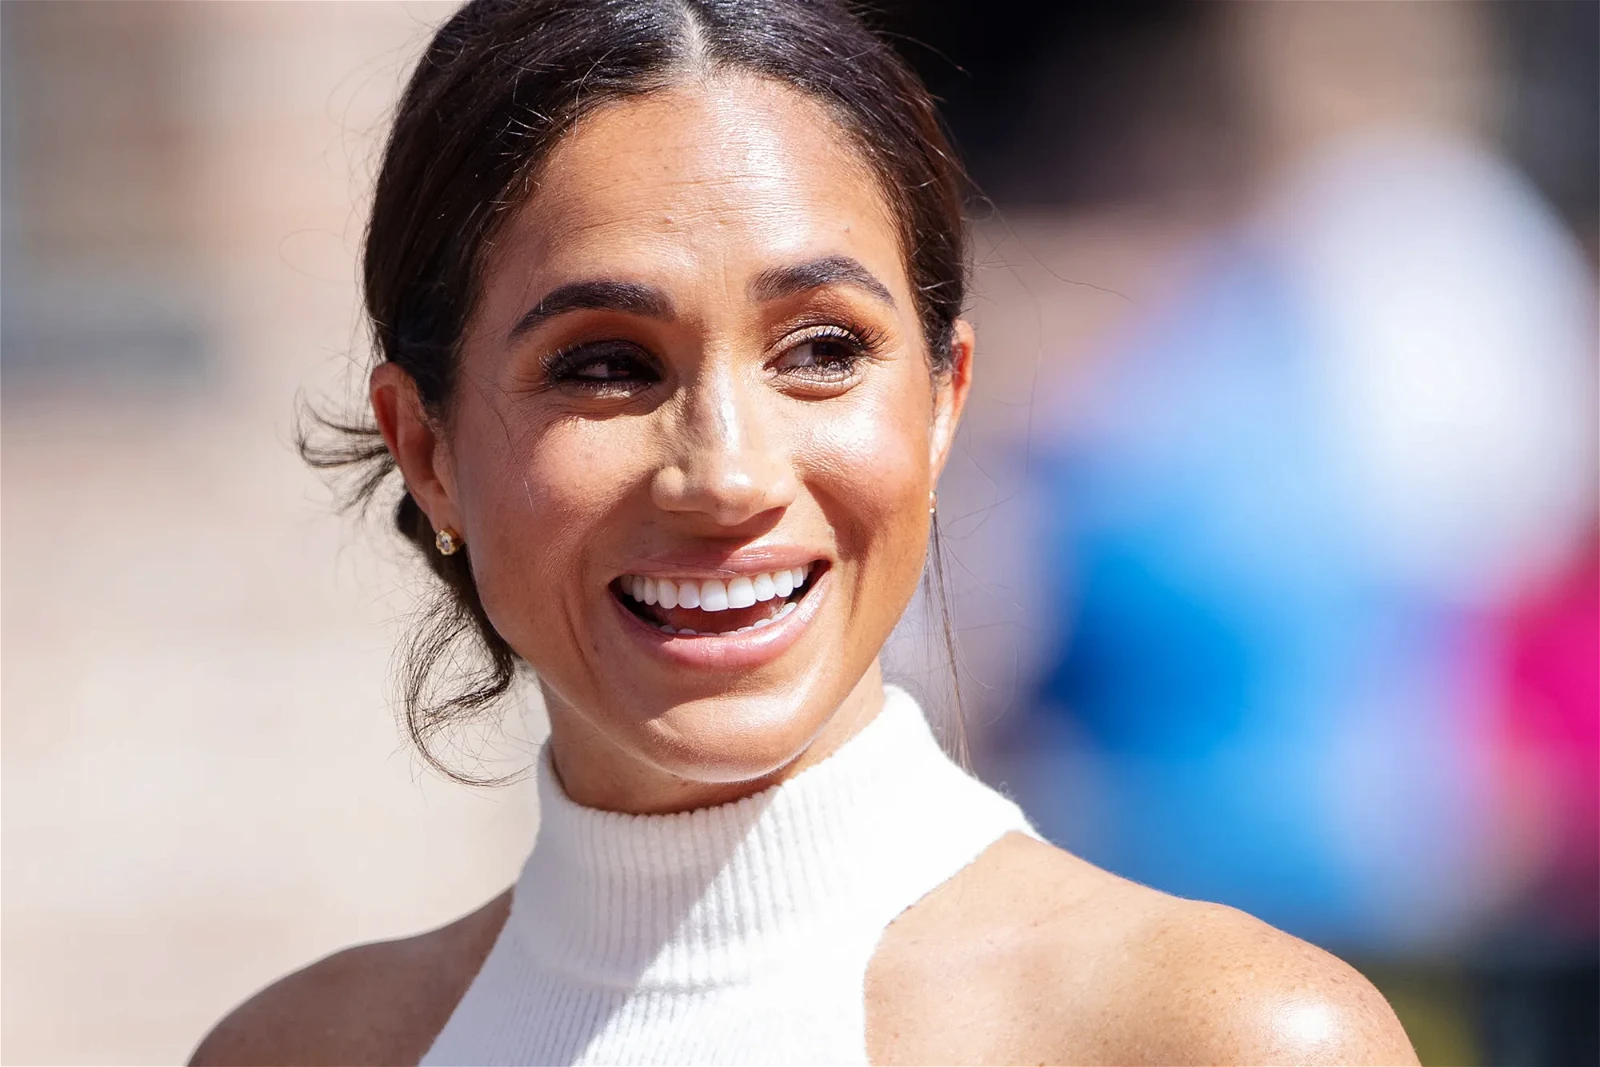 Meghan Markle smiling at the camera